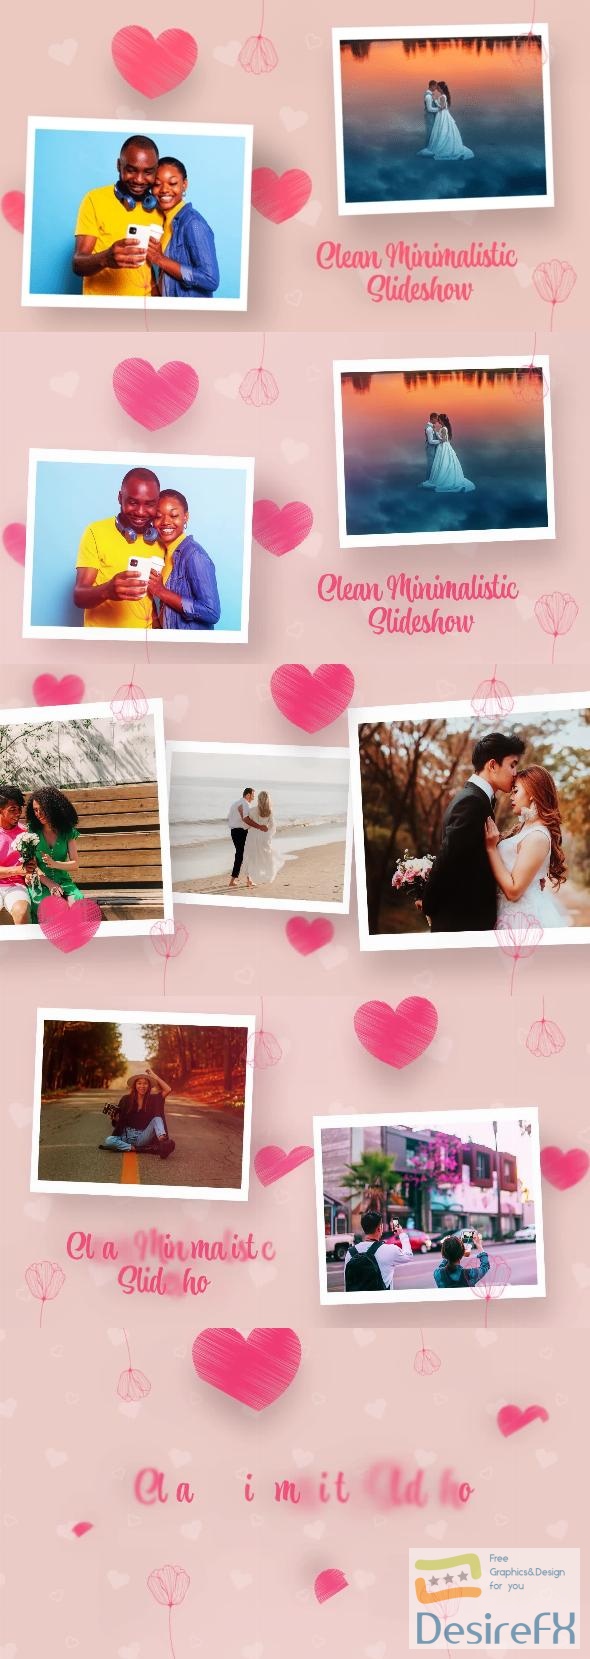 VideoHive Lovely Slideshow and Happy Valentines Day 43277163